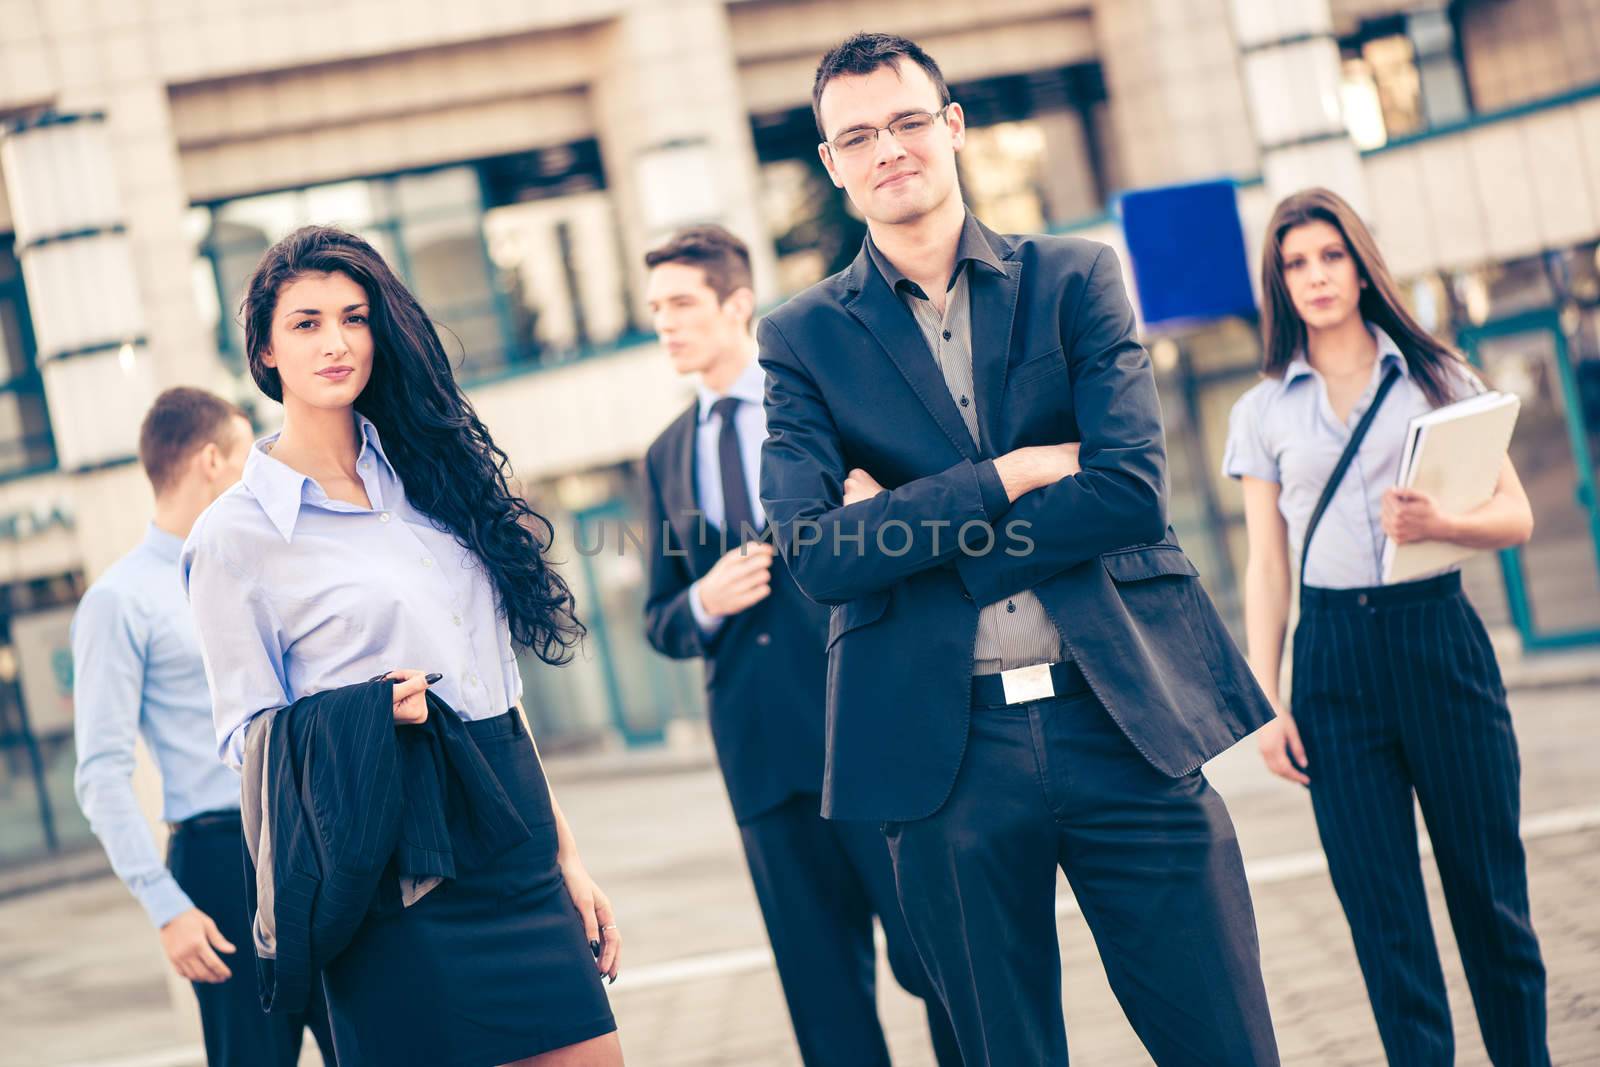 Young businessman and businesswoman with his team in the background standing in front of office building and looking at camera.